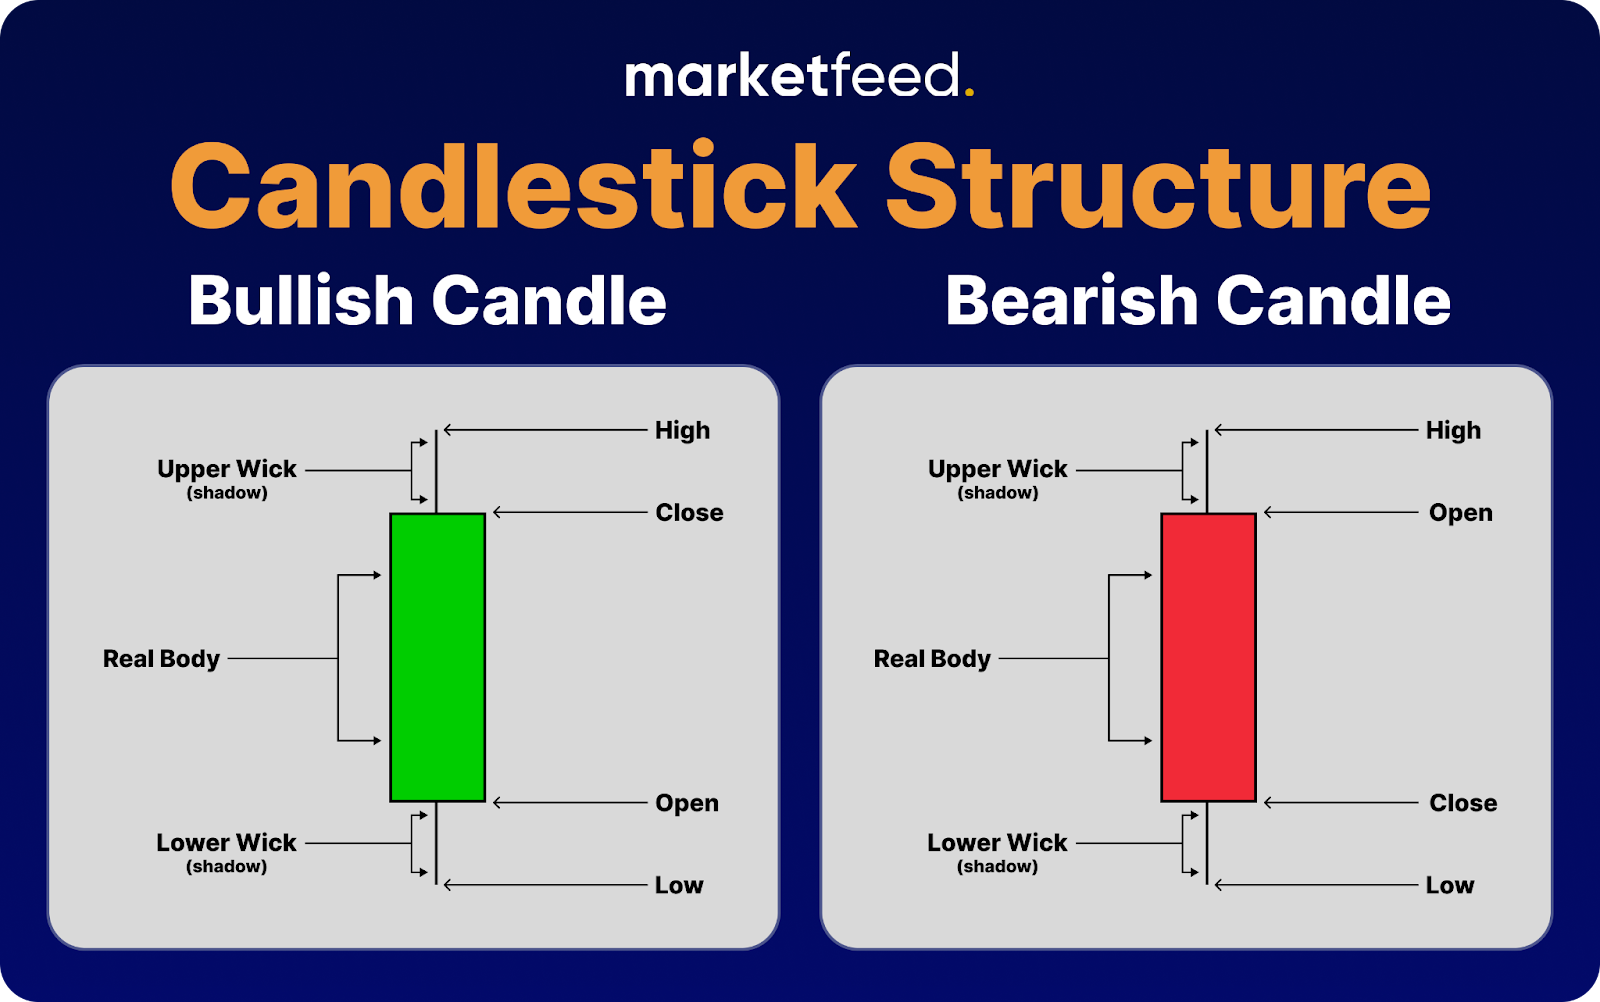 Candlestick Structure